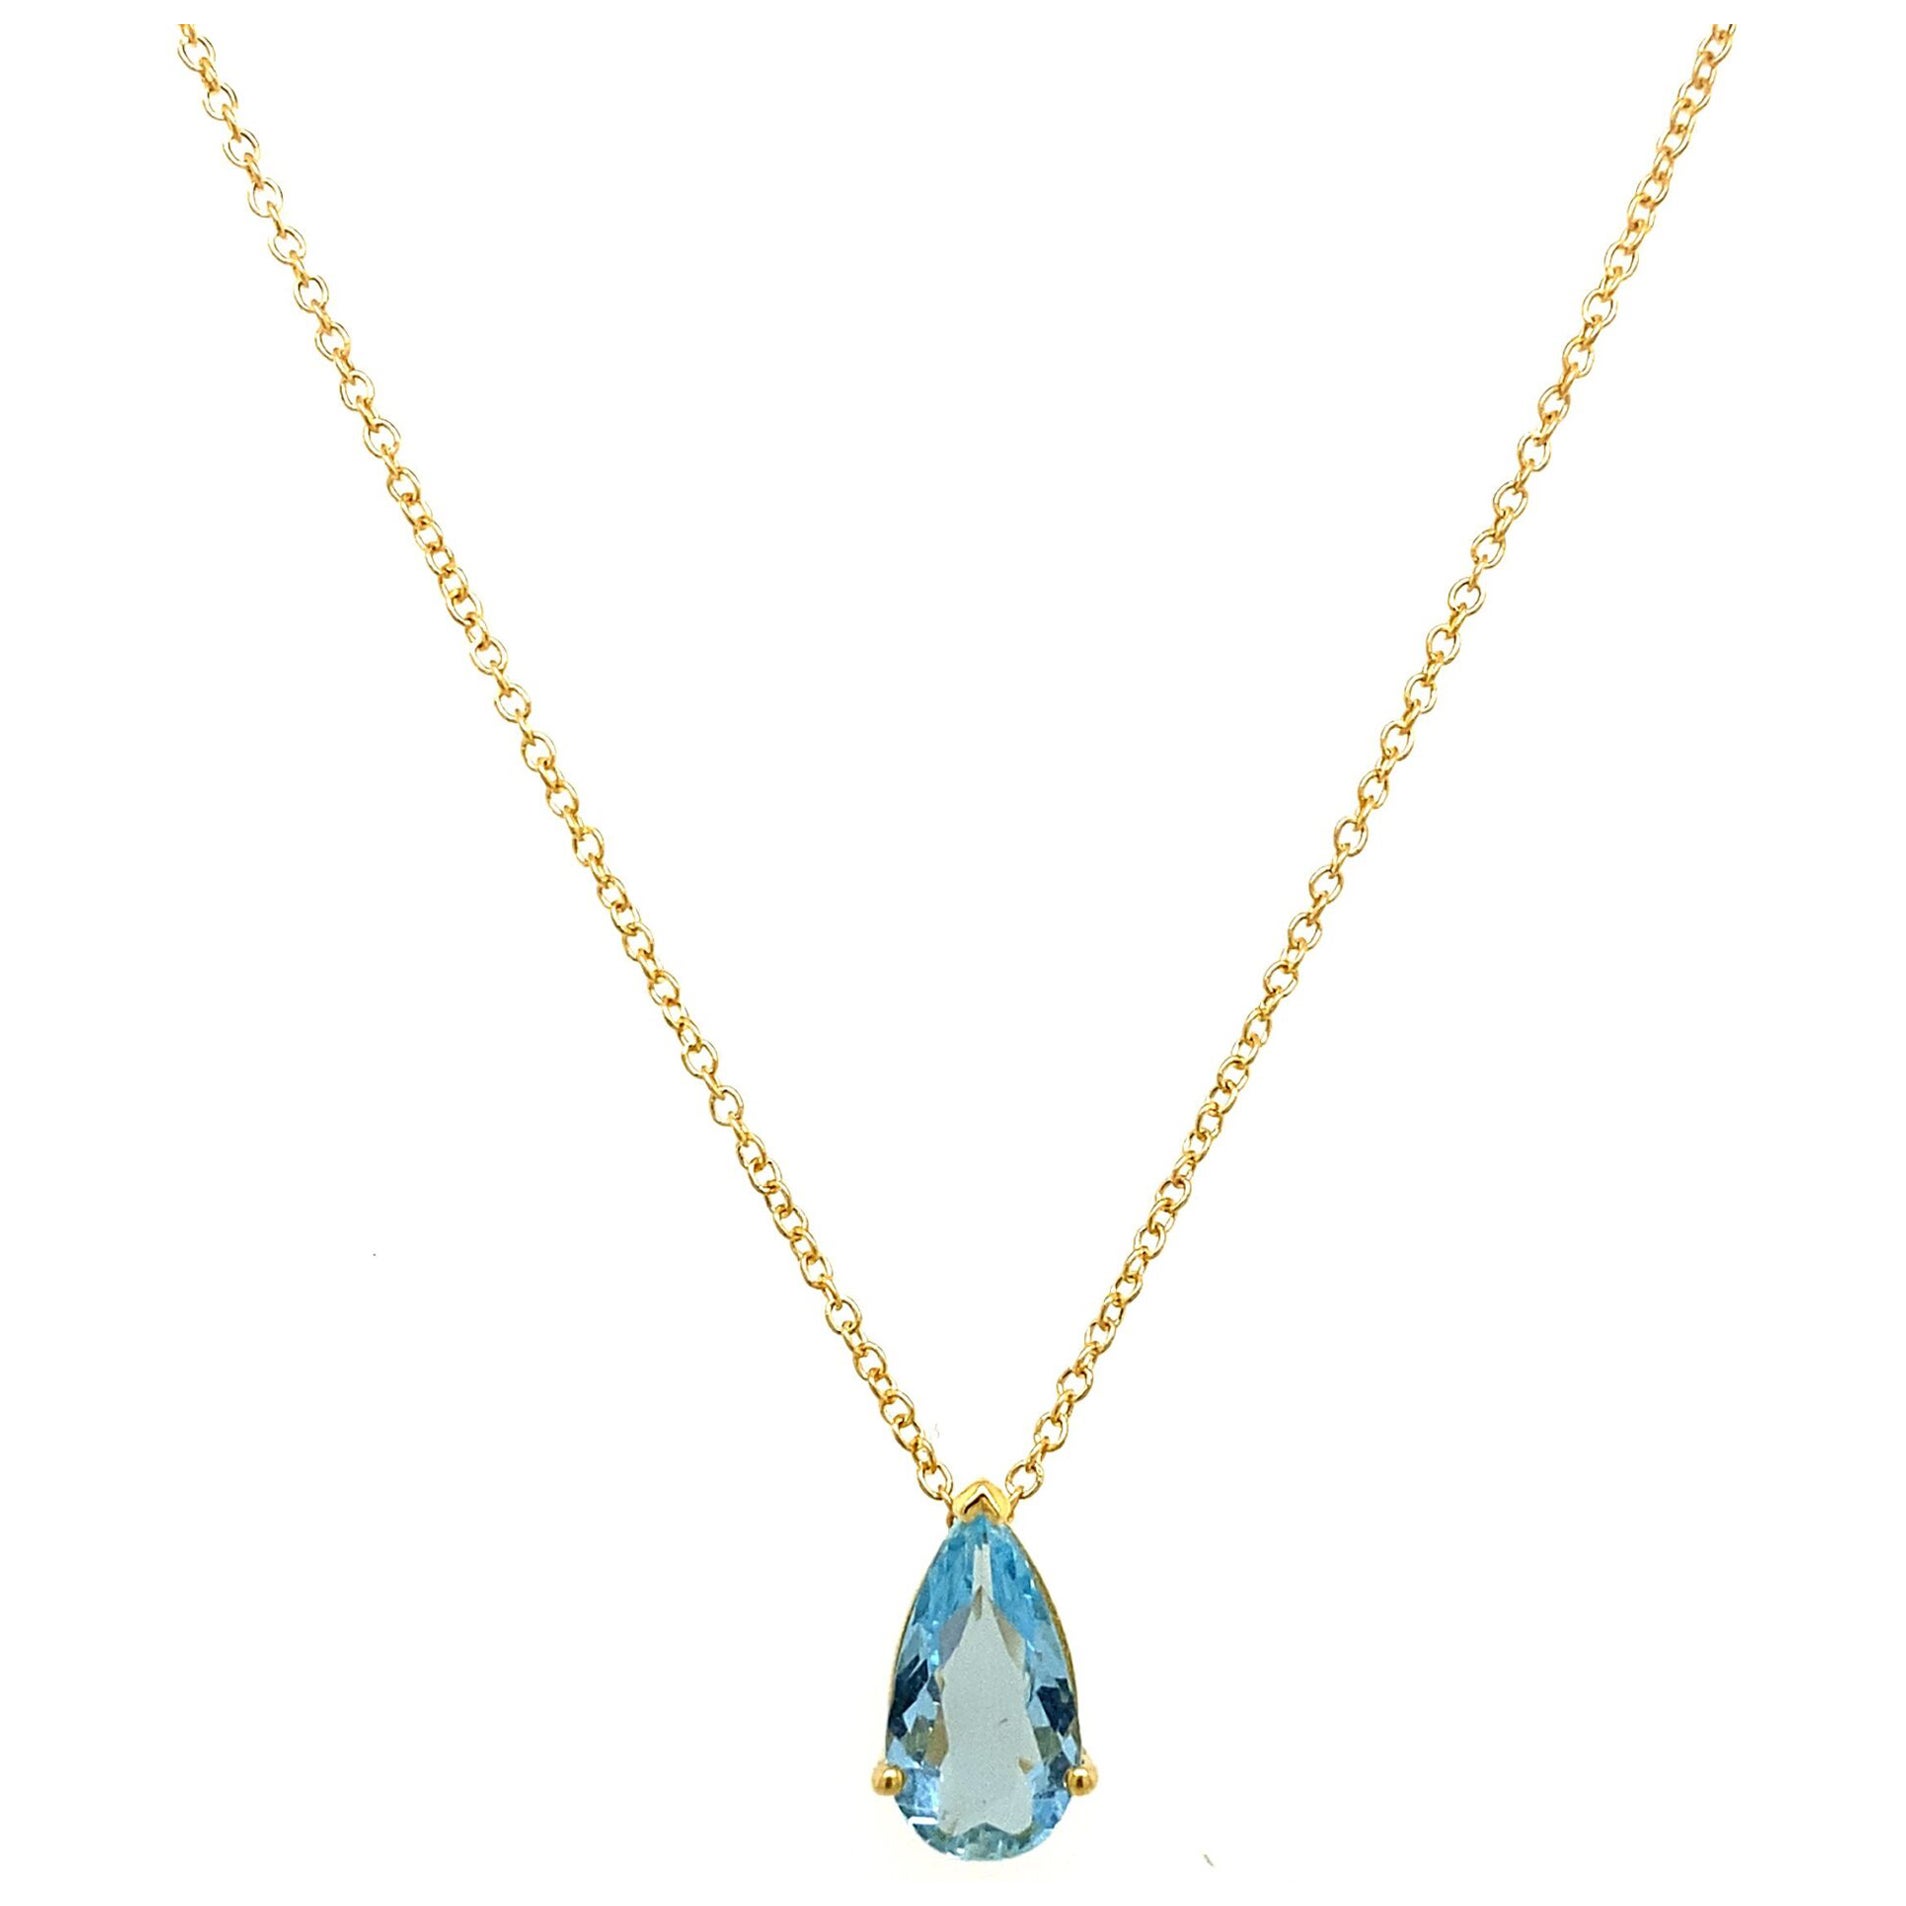 Fine Quality 1.02ct Pear Shape Aquamarine Pendant & 18ct Yellow Gold Chain For Sale